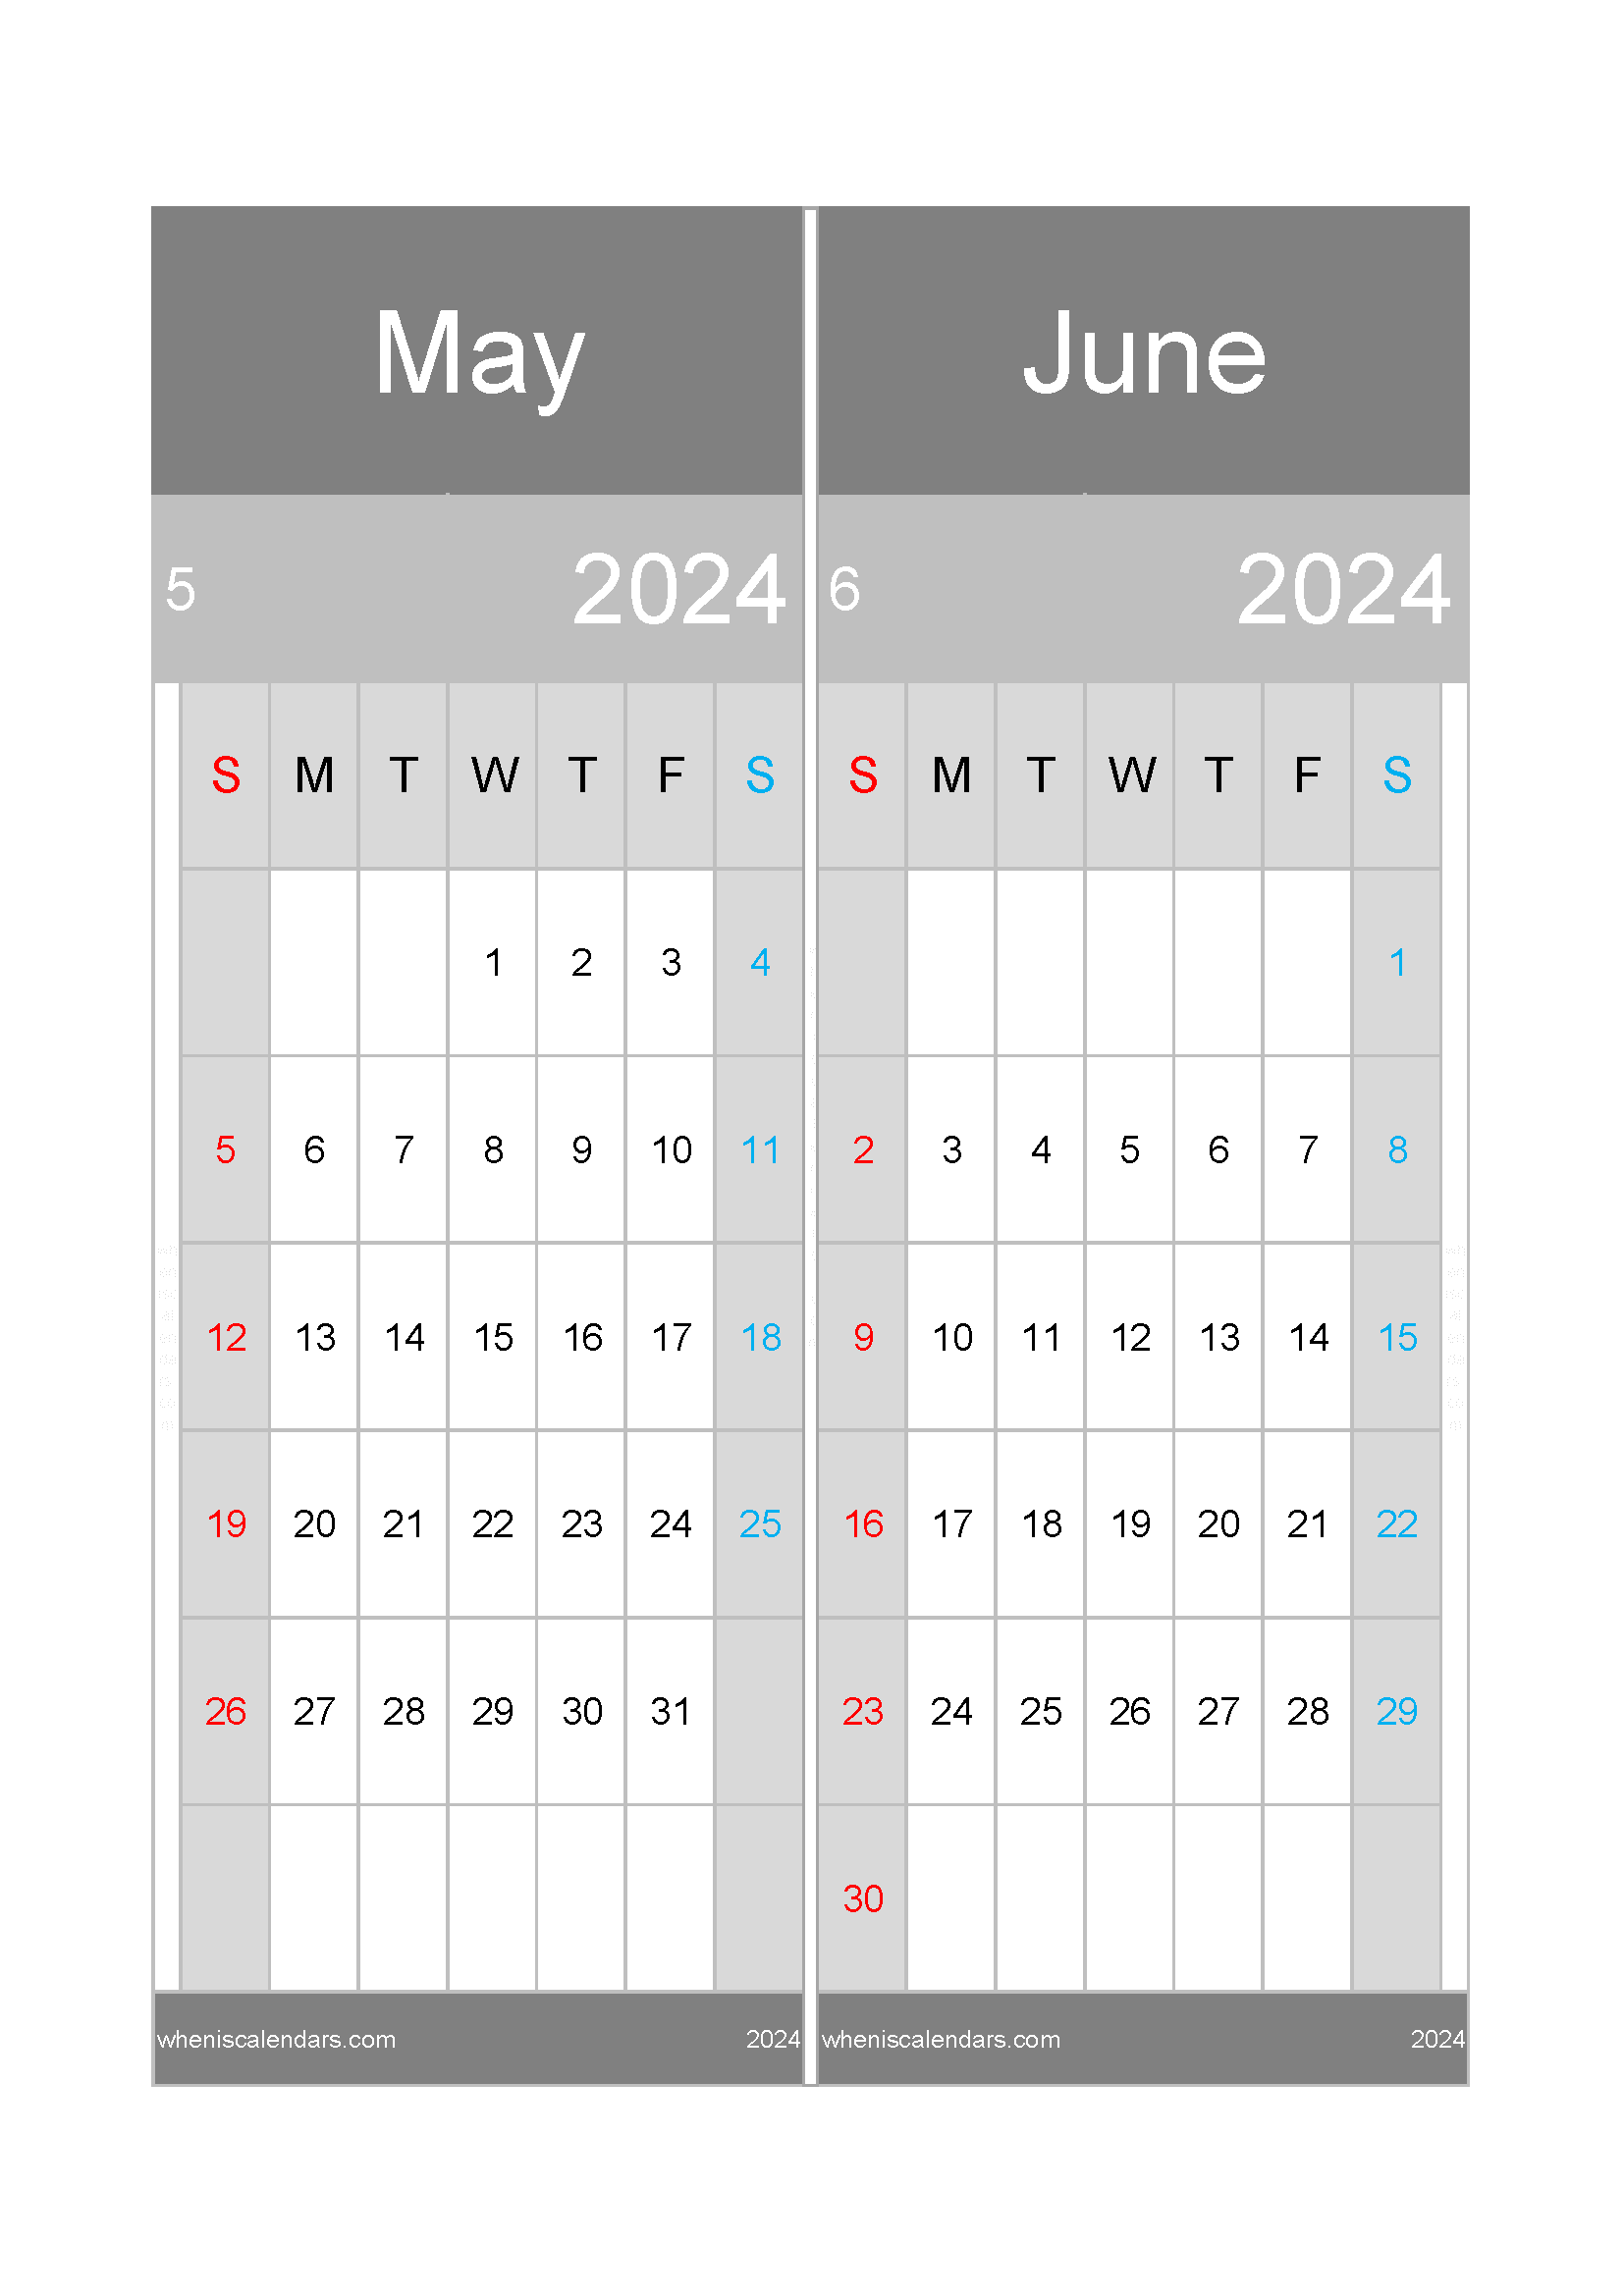 Download Calendar for the month of May and June 2024 A4 MJ447